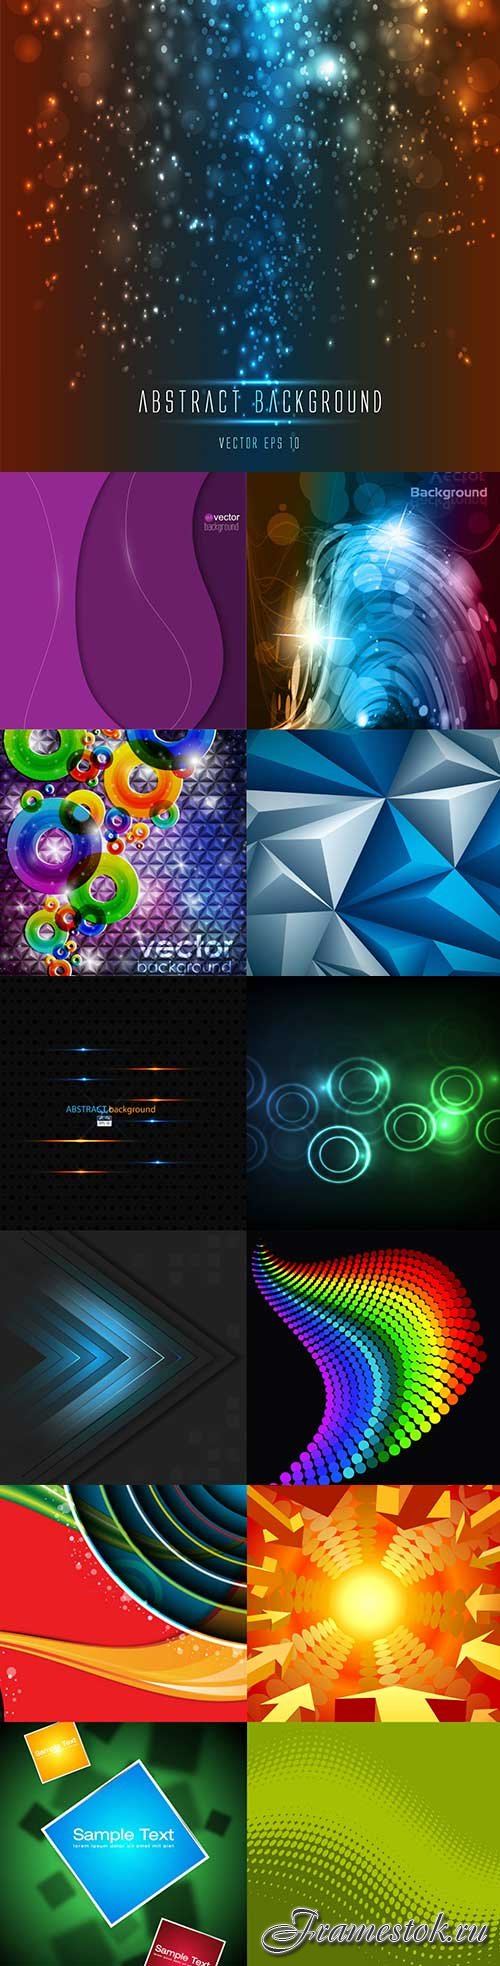 Bright colorful abstract backgrounds vector -50